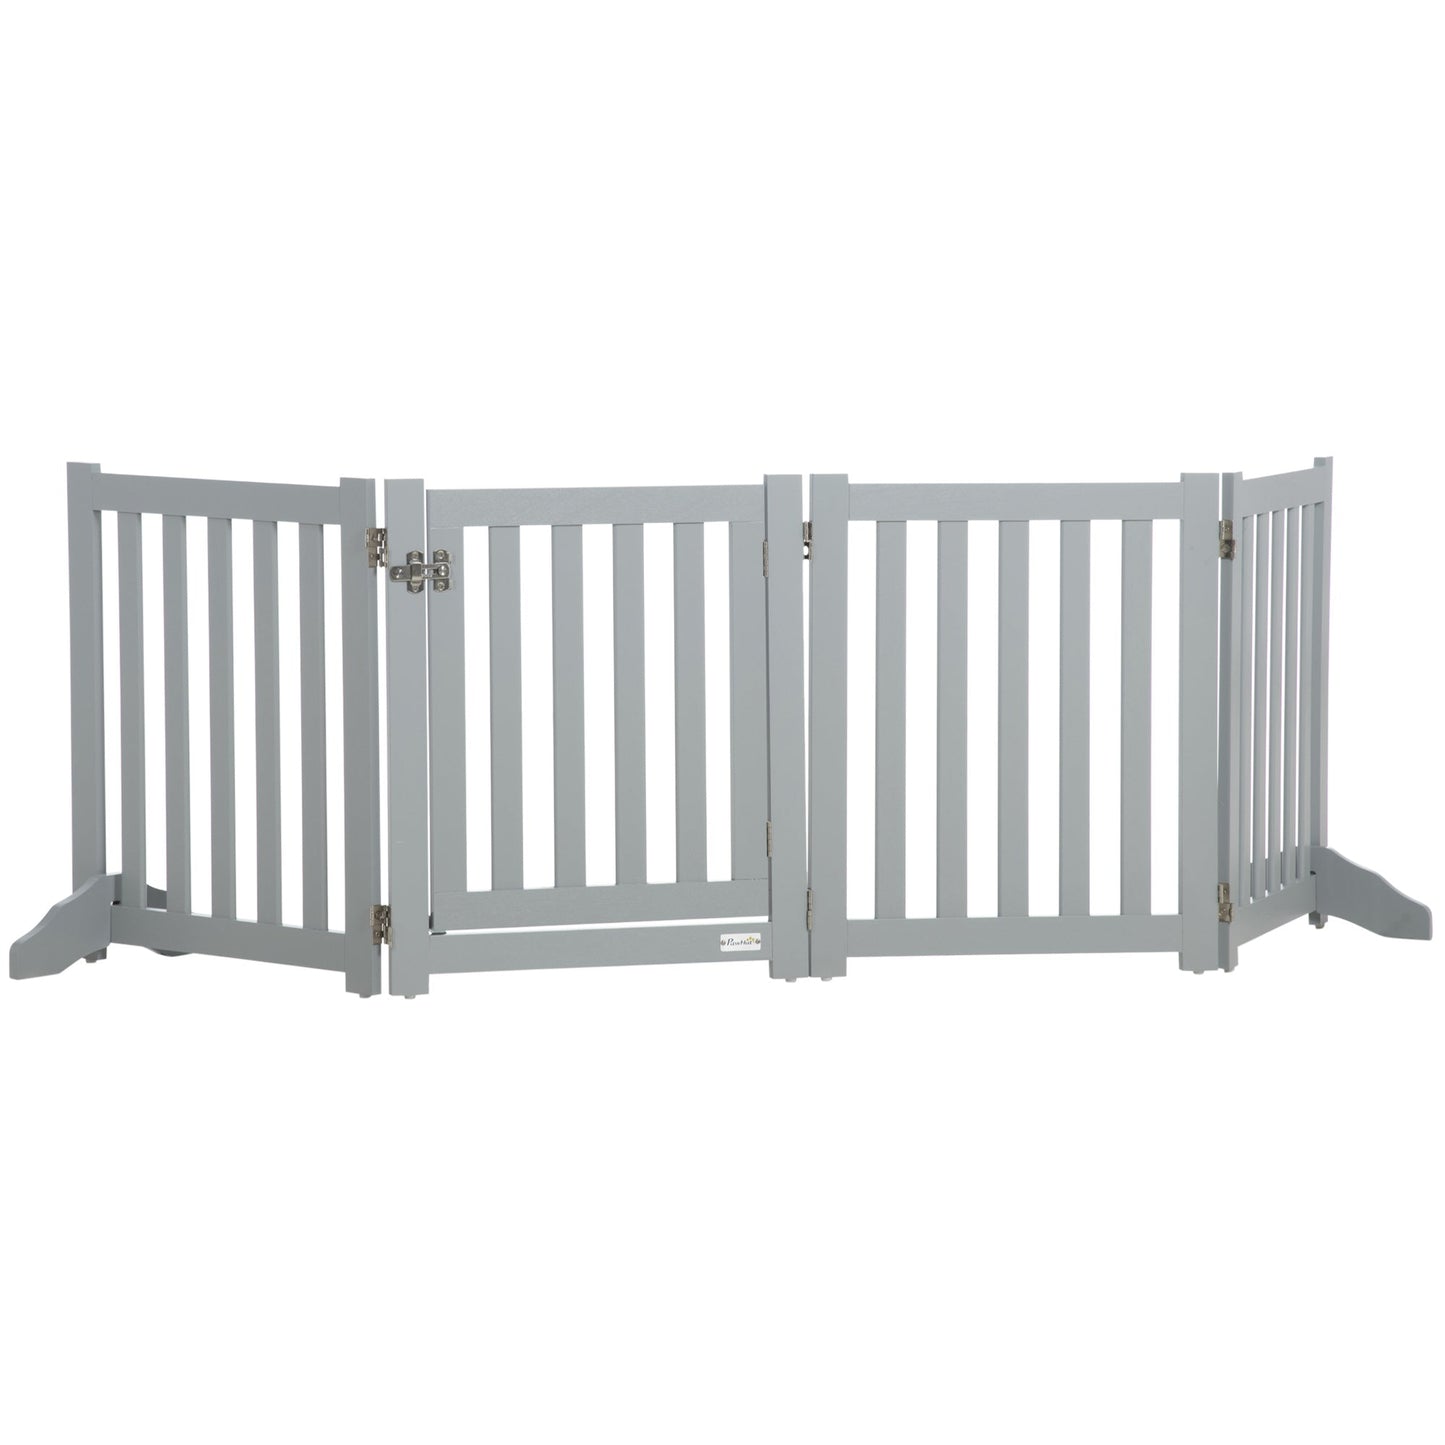 Foldable Dog Gate with Door, 4 Panels Freestanding Pet Gate with Support Feet Indoor Playpen for Small Dogs and Below, Grey at Gallery Canada